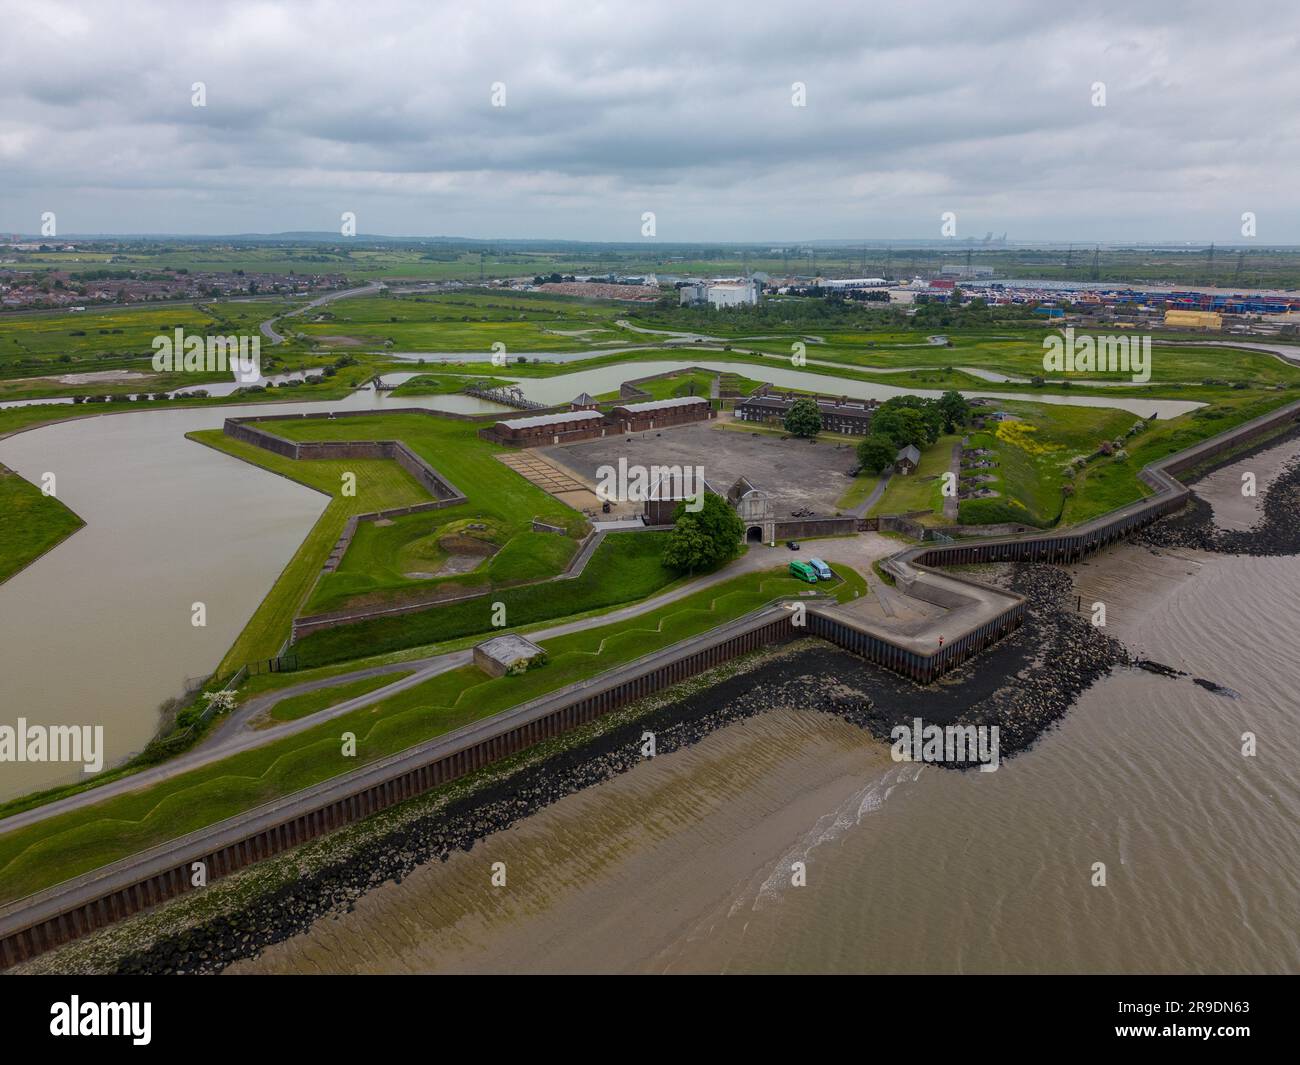 Aerial drone photo of the Tilbury Fortress. The fort is located next to the river Thames in England Stock Photo